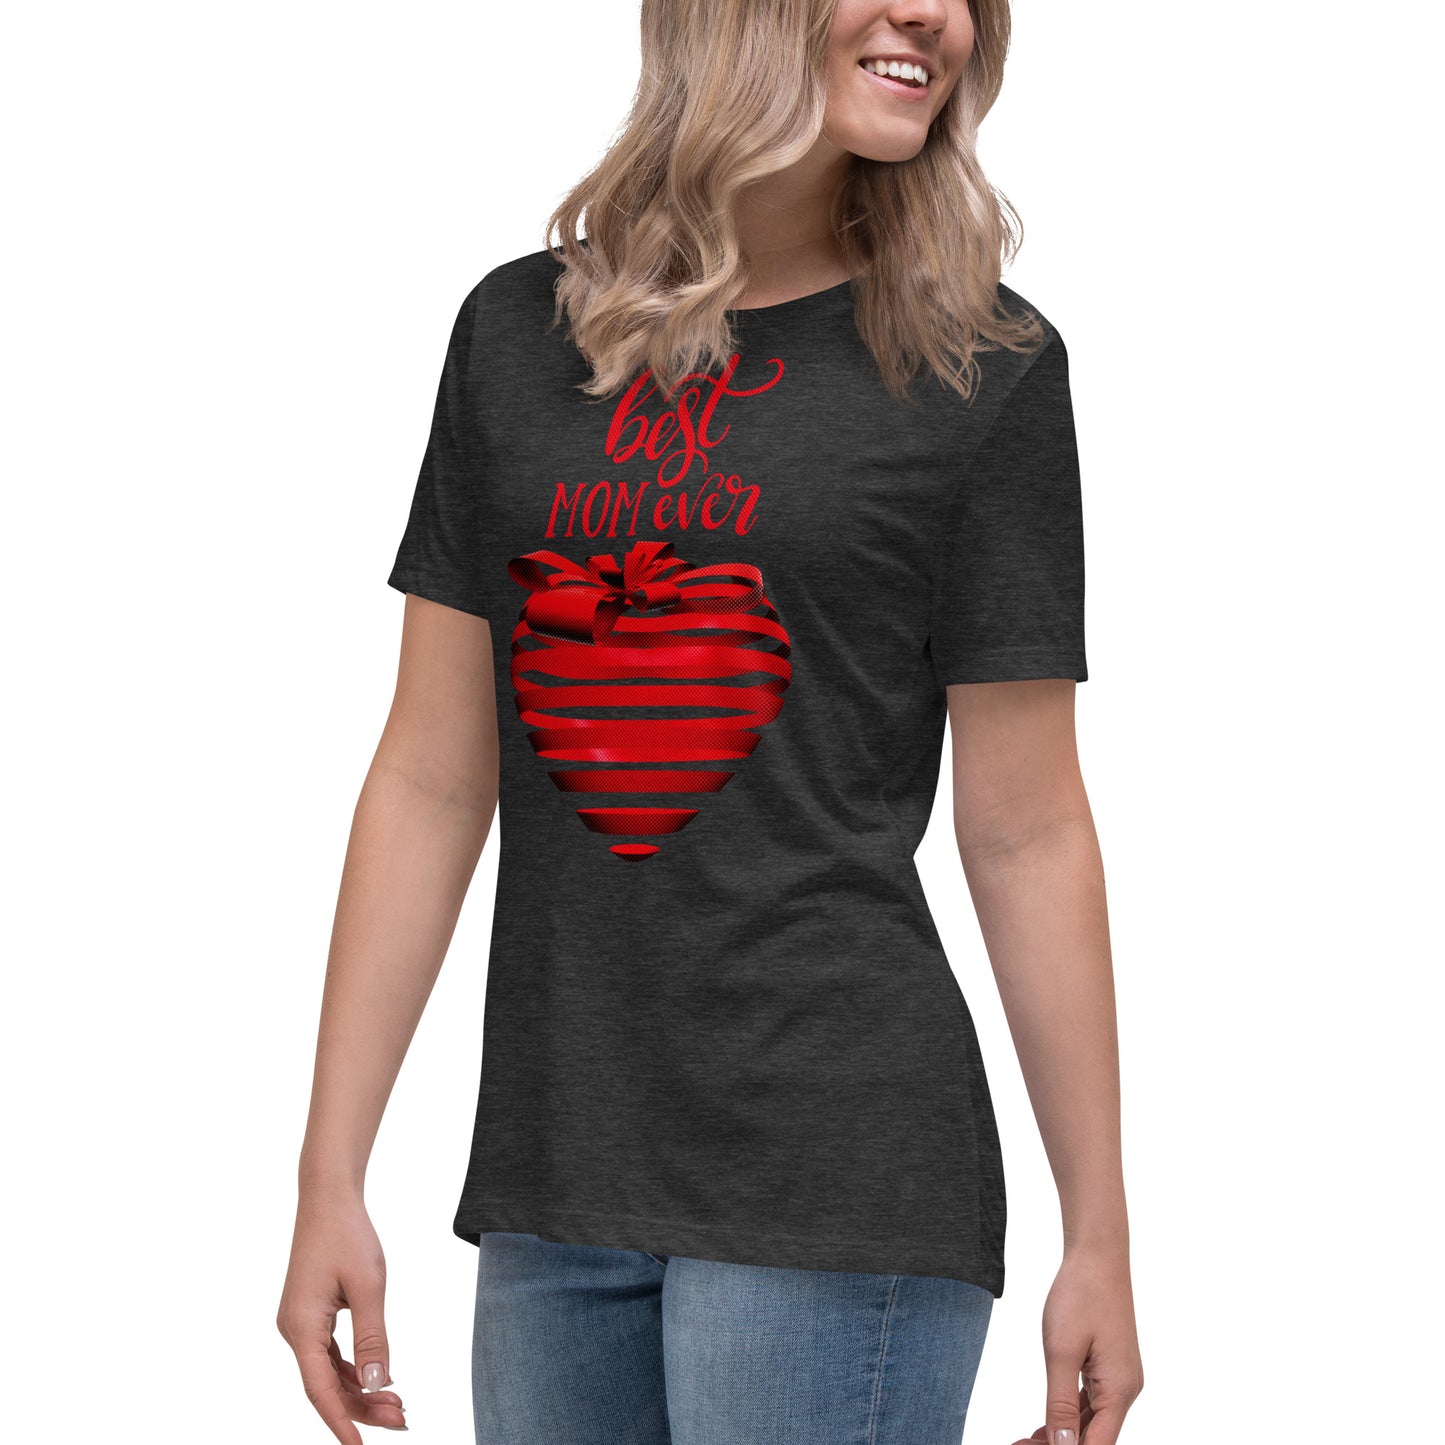 Women with dark grey T-shirt with red text best MOM Ever and red heart